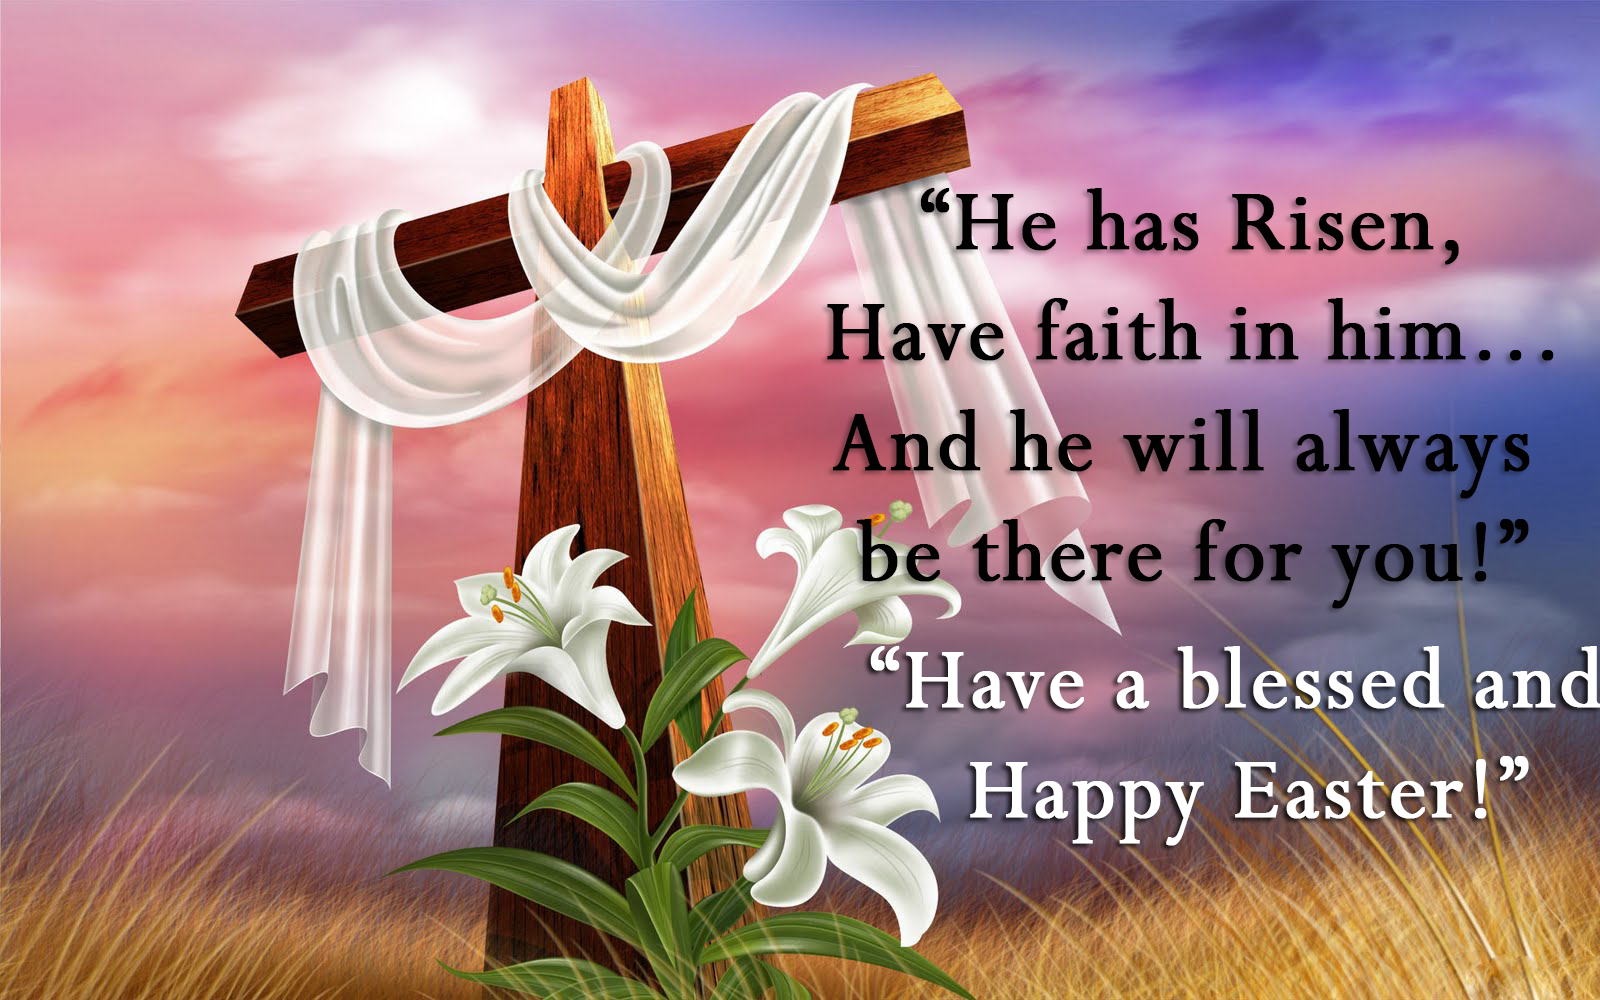 Happy Easter Image, Picture, Pics, Photo & Wallpaper 2021